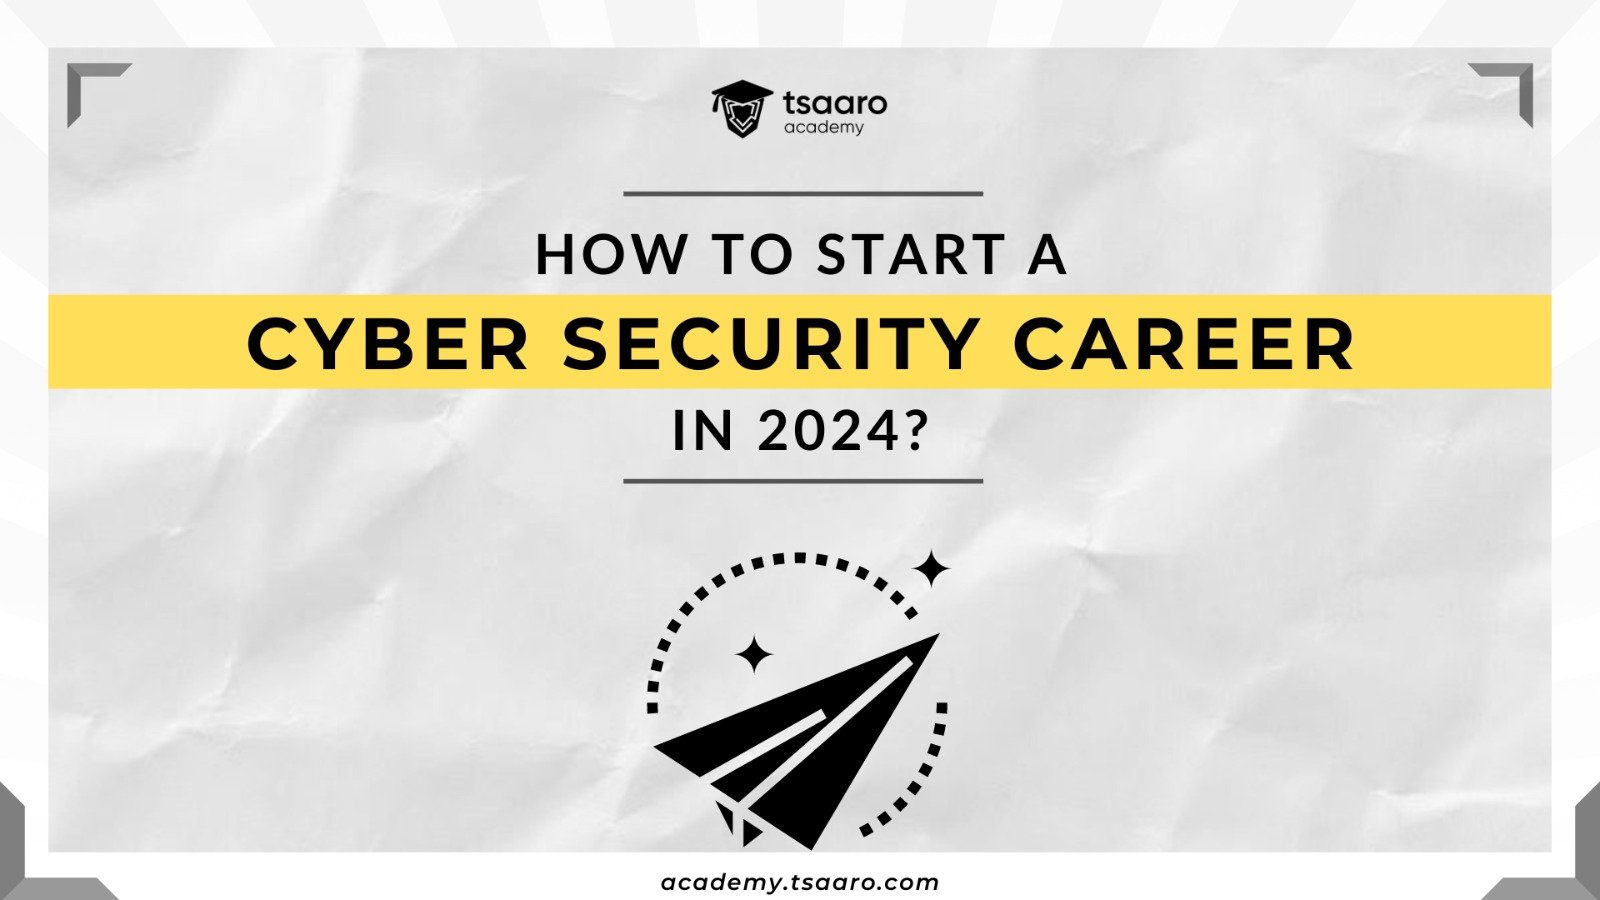 How to Start a Cyber Security Career in 2024 | Tsaaro Academy